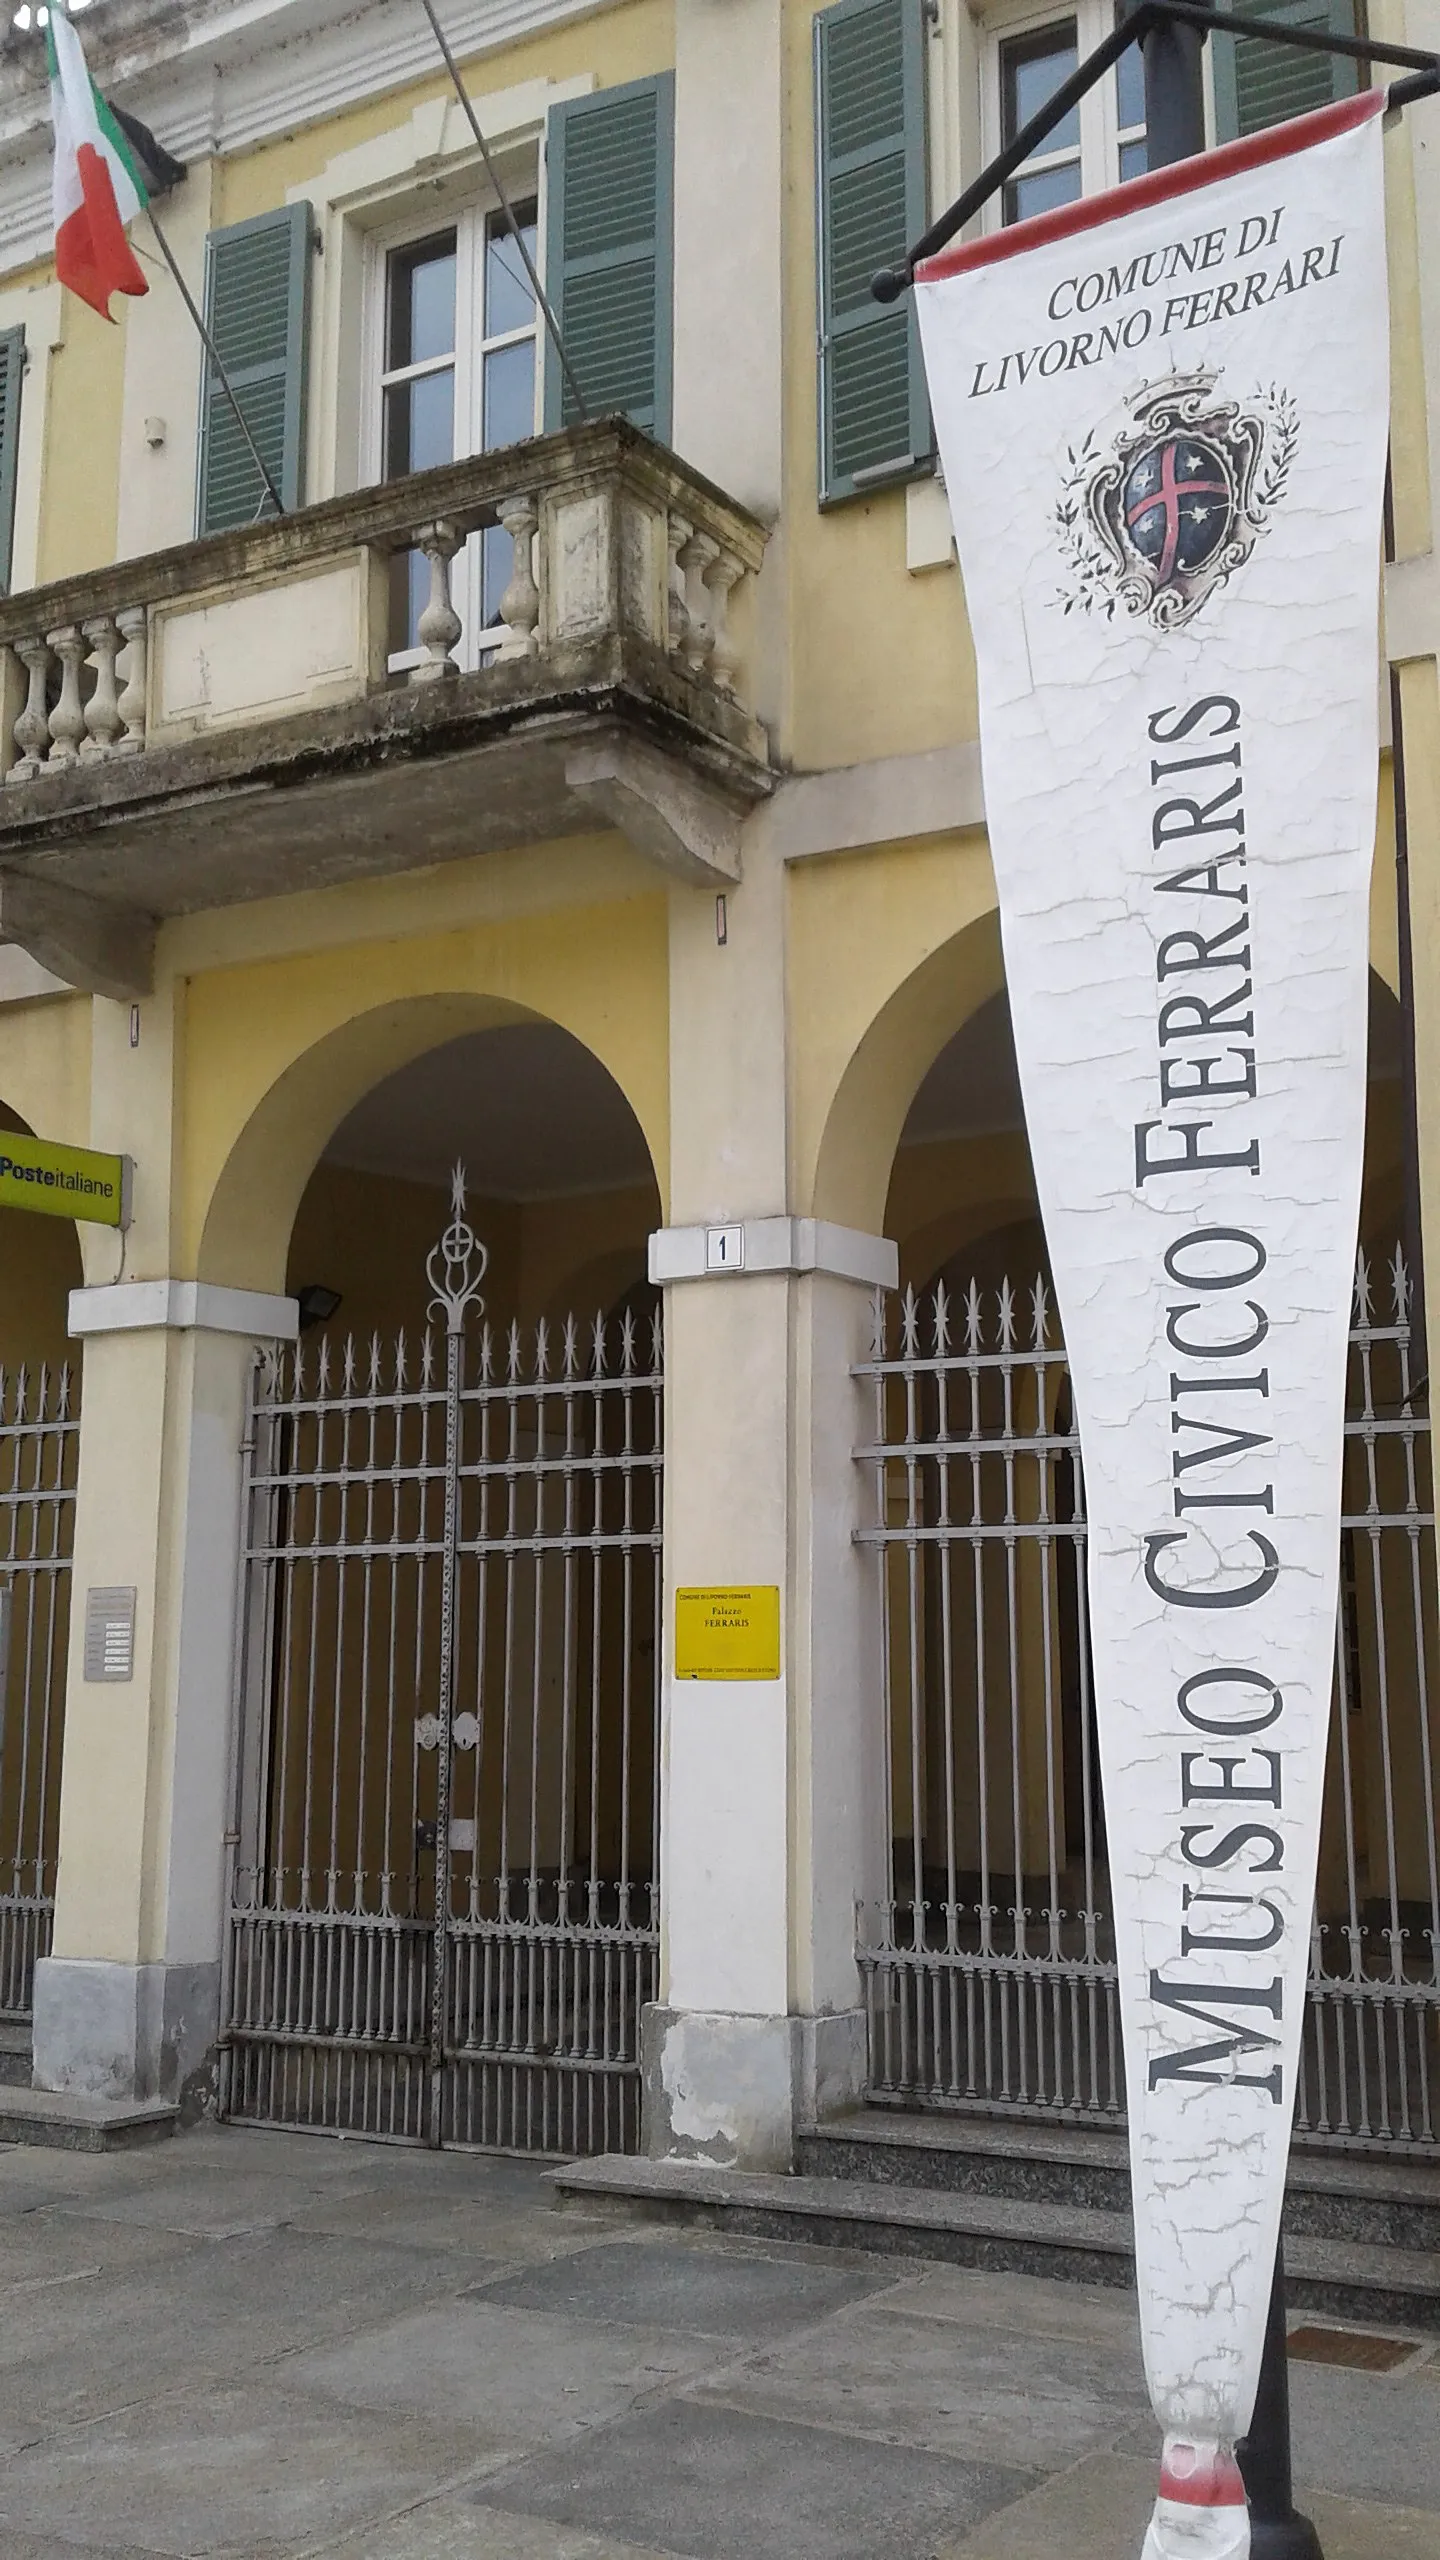 Photo showing: Entrance of the Galileo Ferraris Museum in Livorno Ferraris, Italy